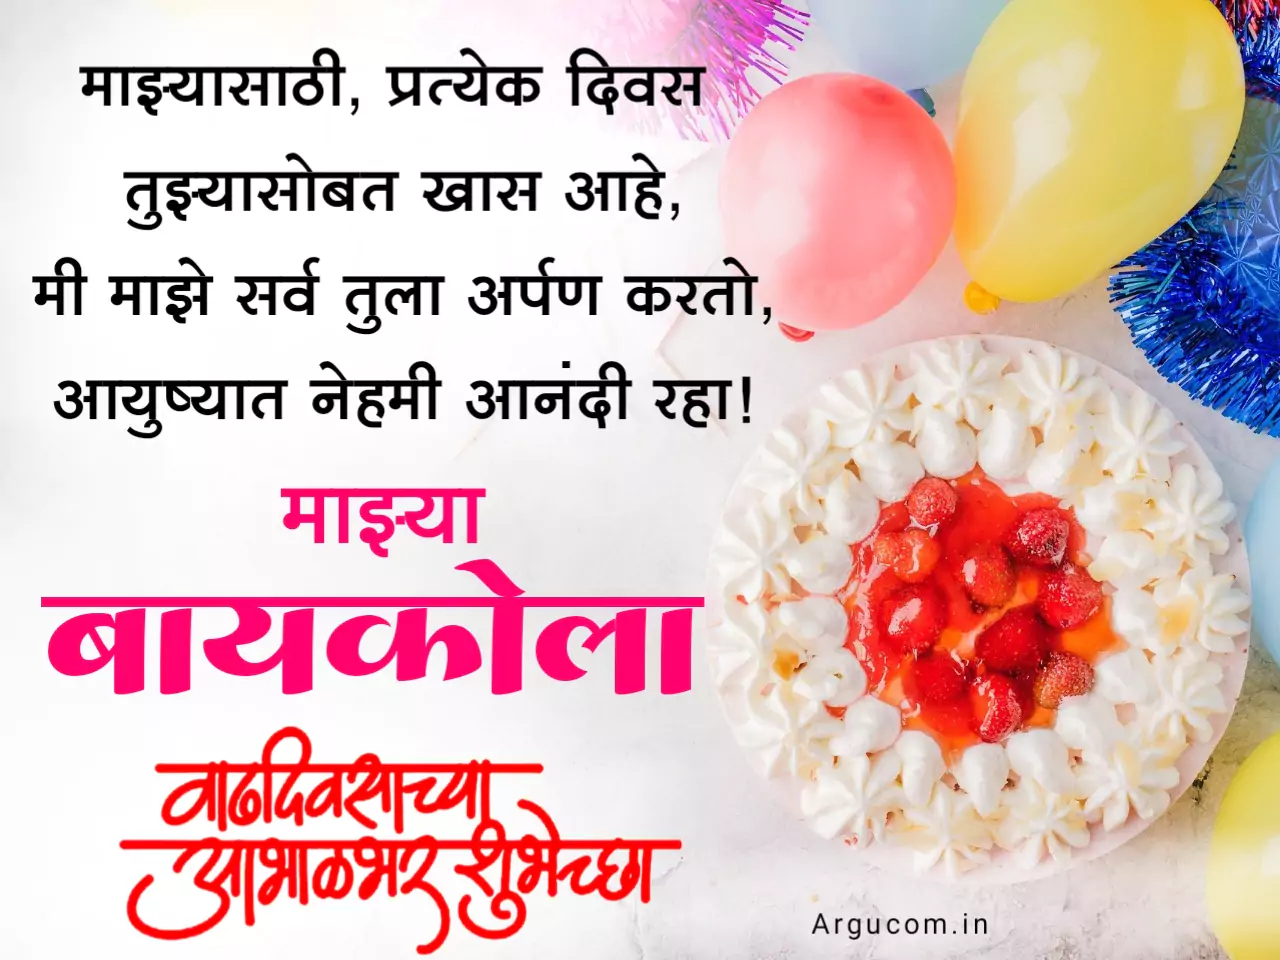 Birthday Greetings for wife in marathi